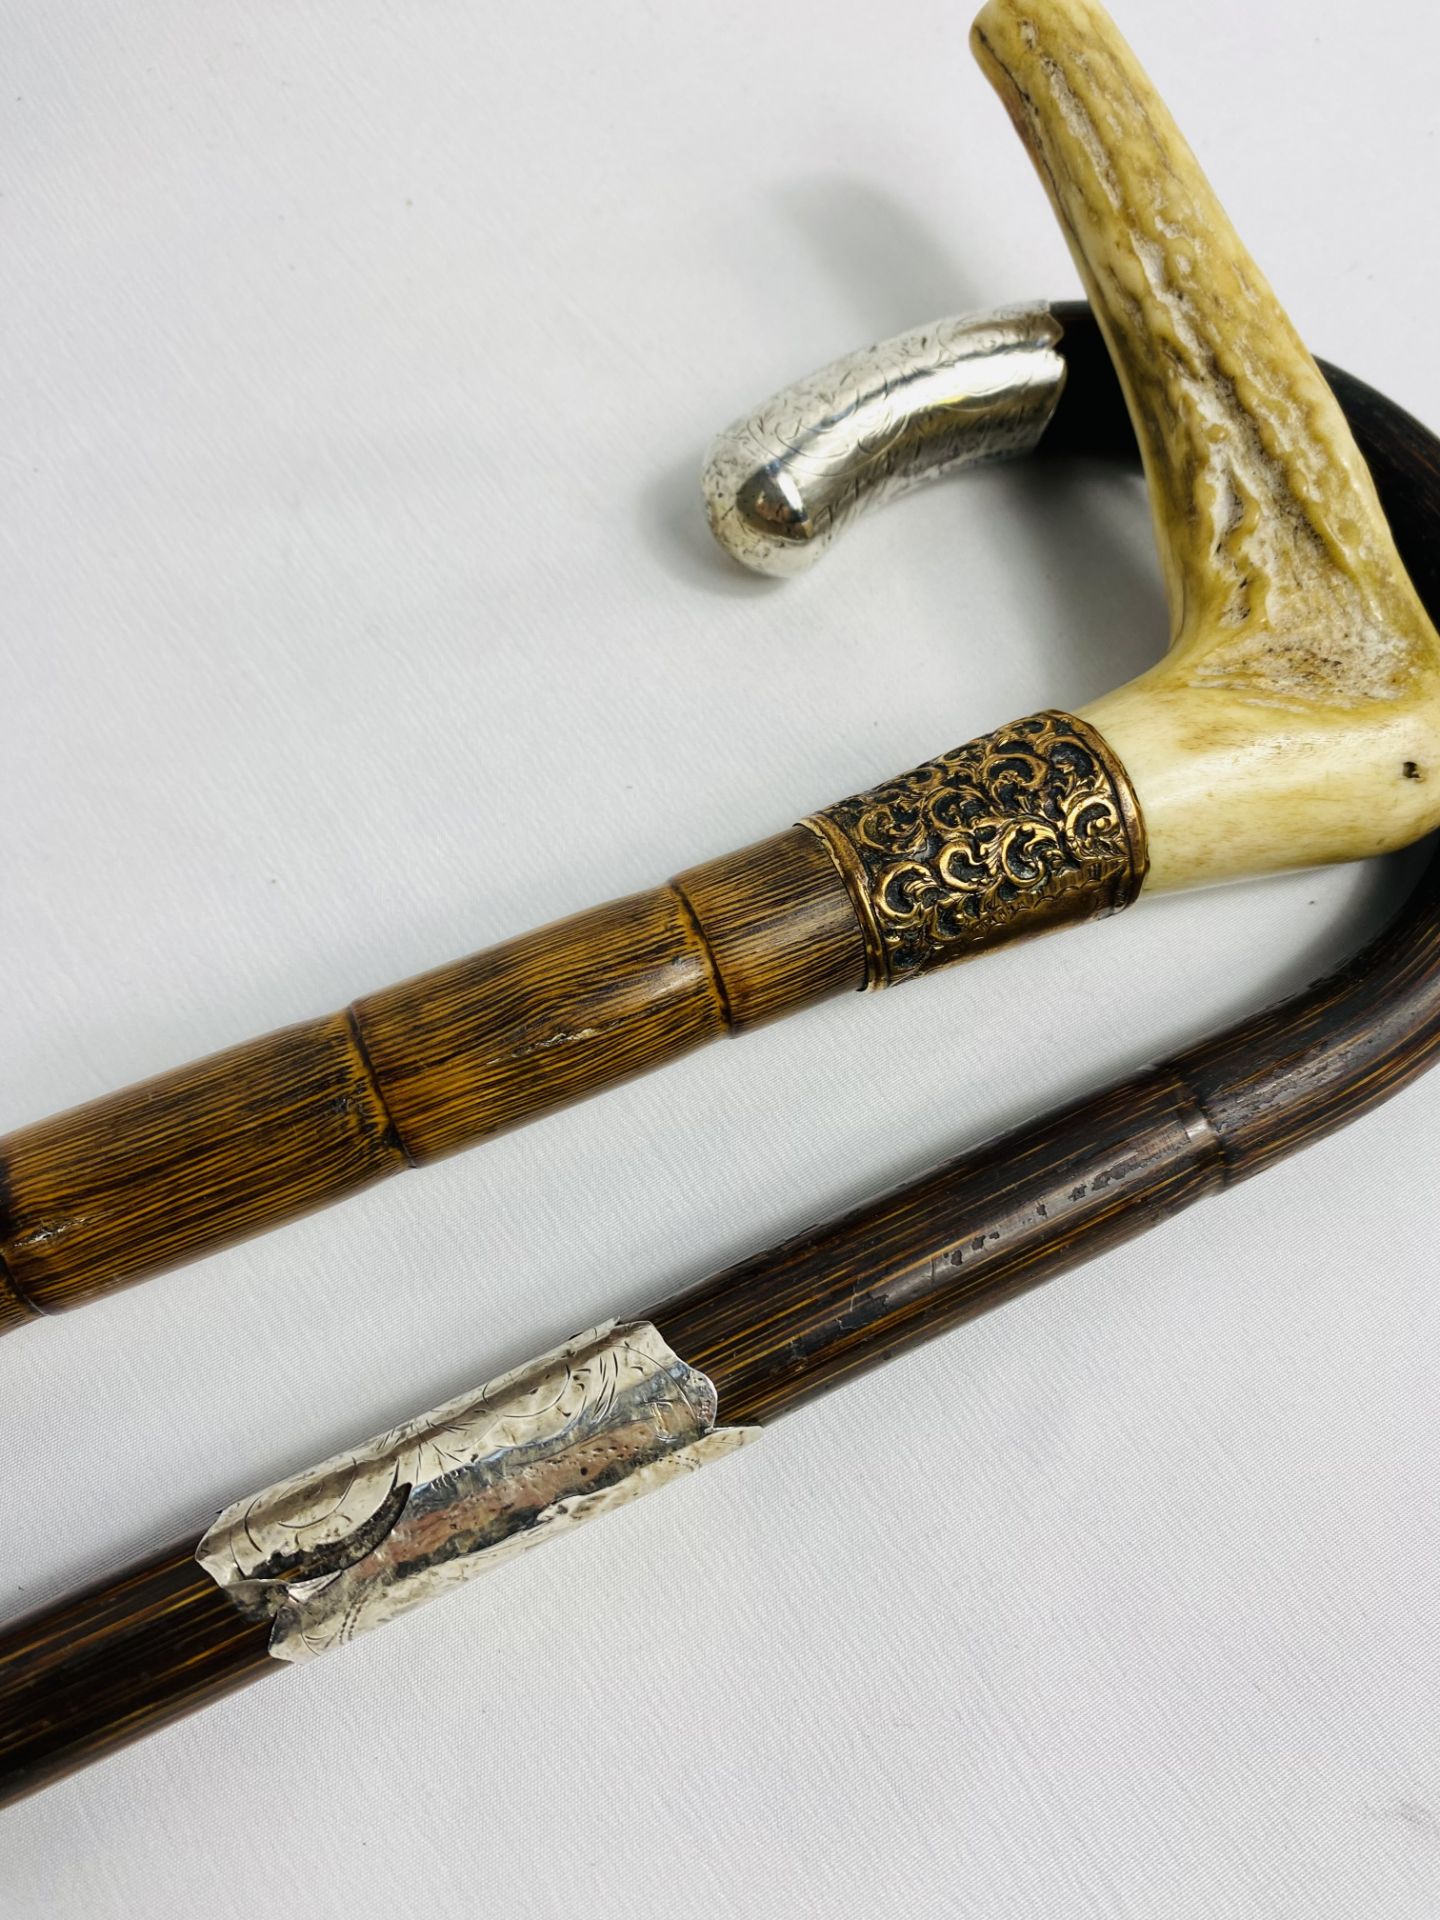 Silver tipped cane together with a cane with yellow metal ferrule - Image 3 of 4